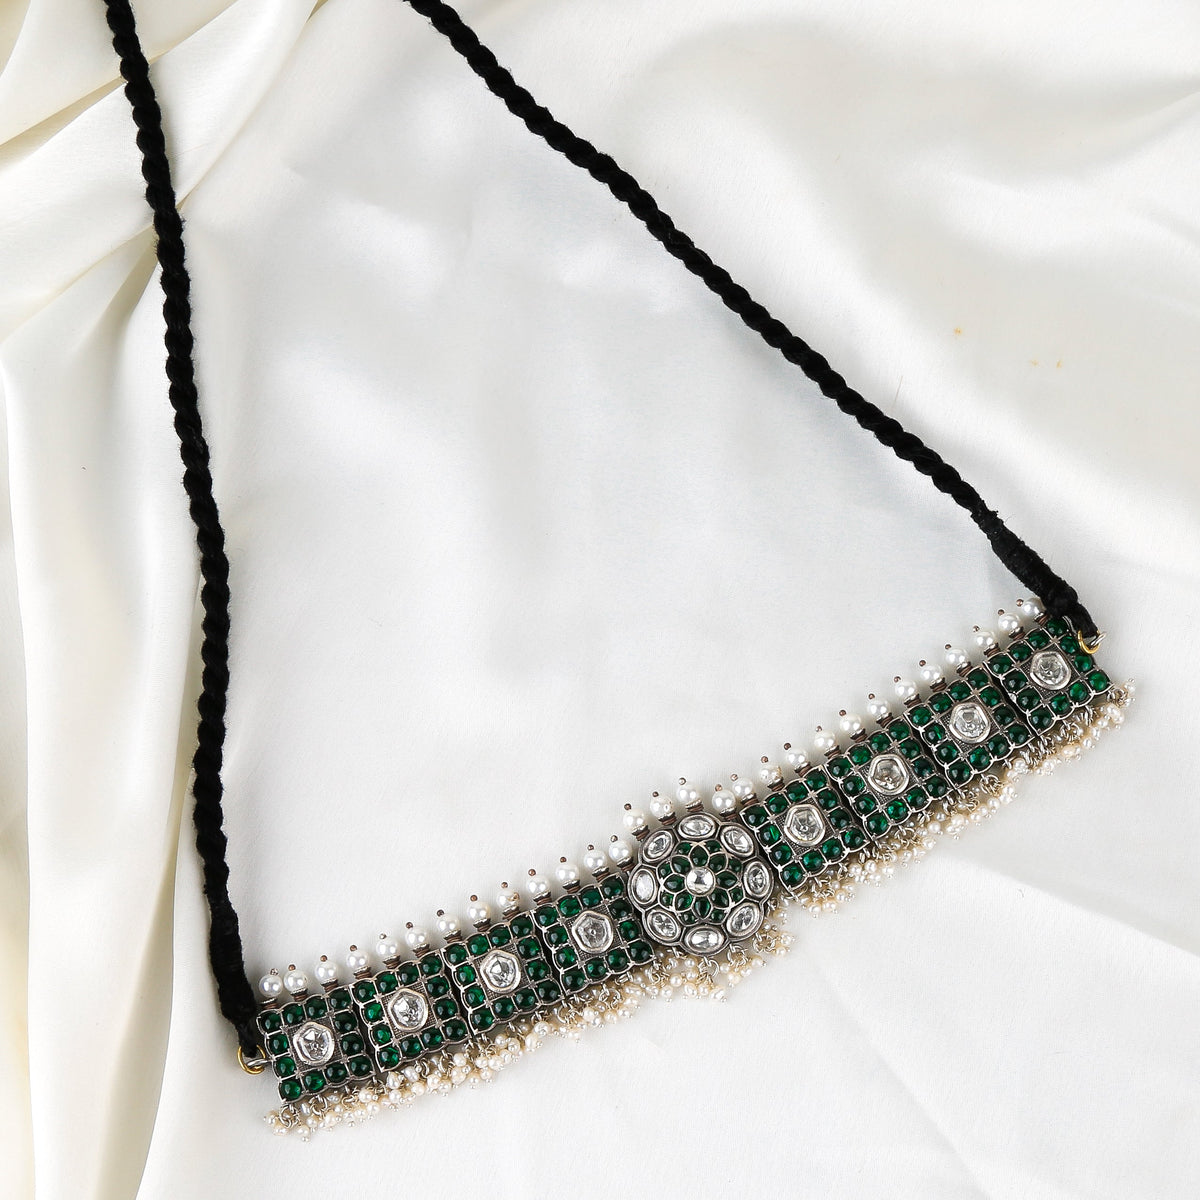 The Elegant Emerald-Pearl Wide Band Choker Necklace